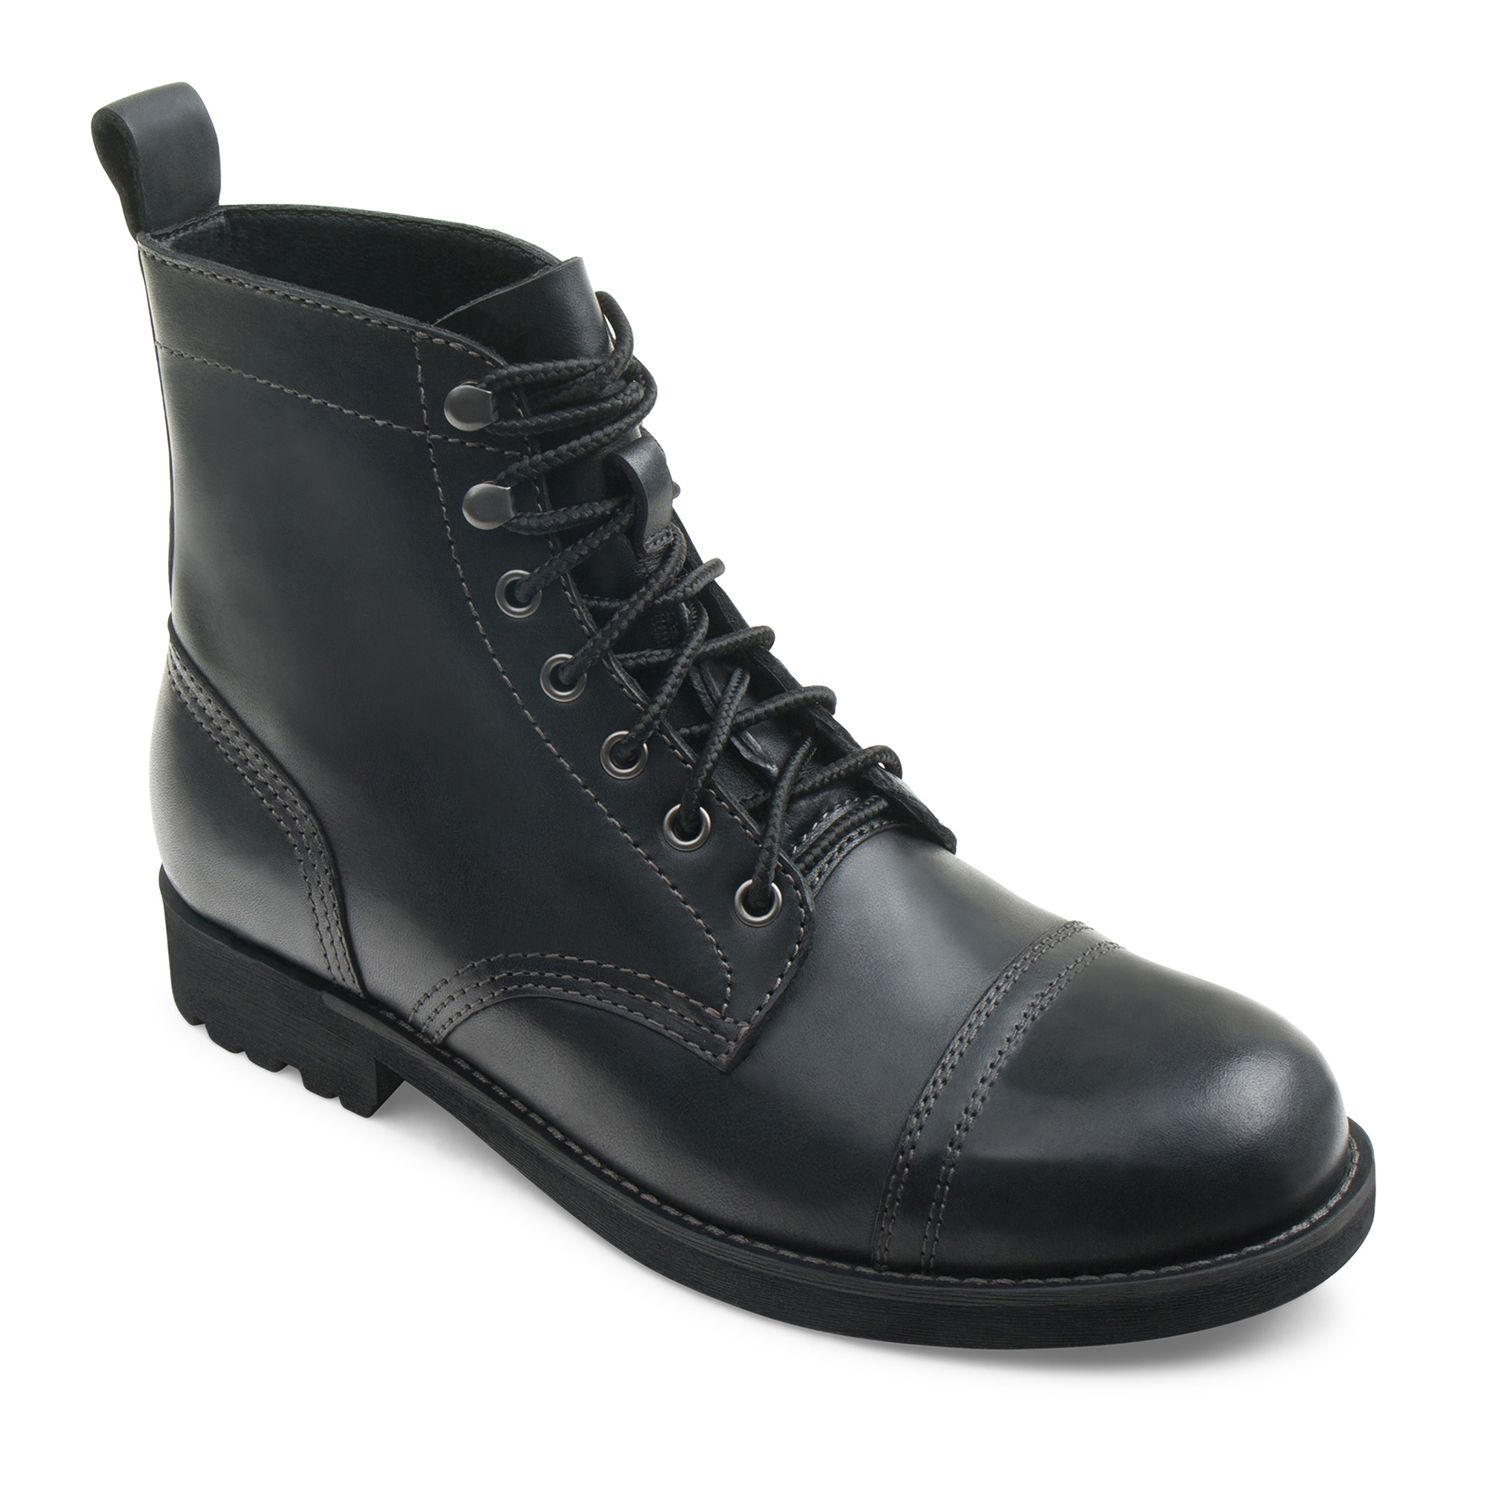 Image for Eastland Jayce Men's Leather Boots at Kohl's.